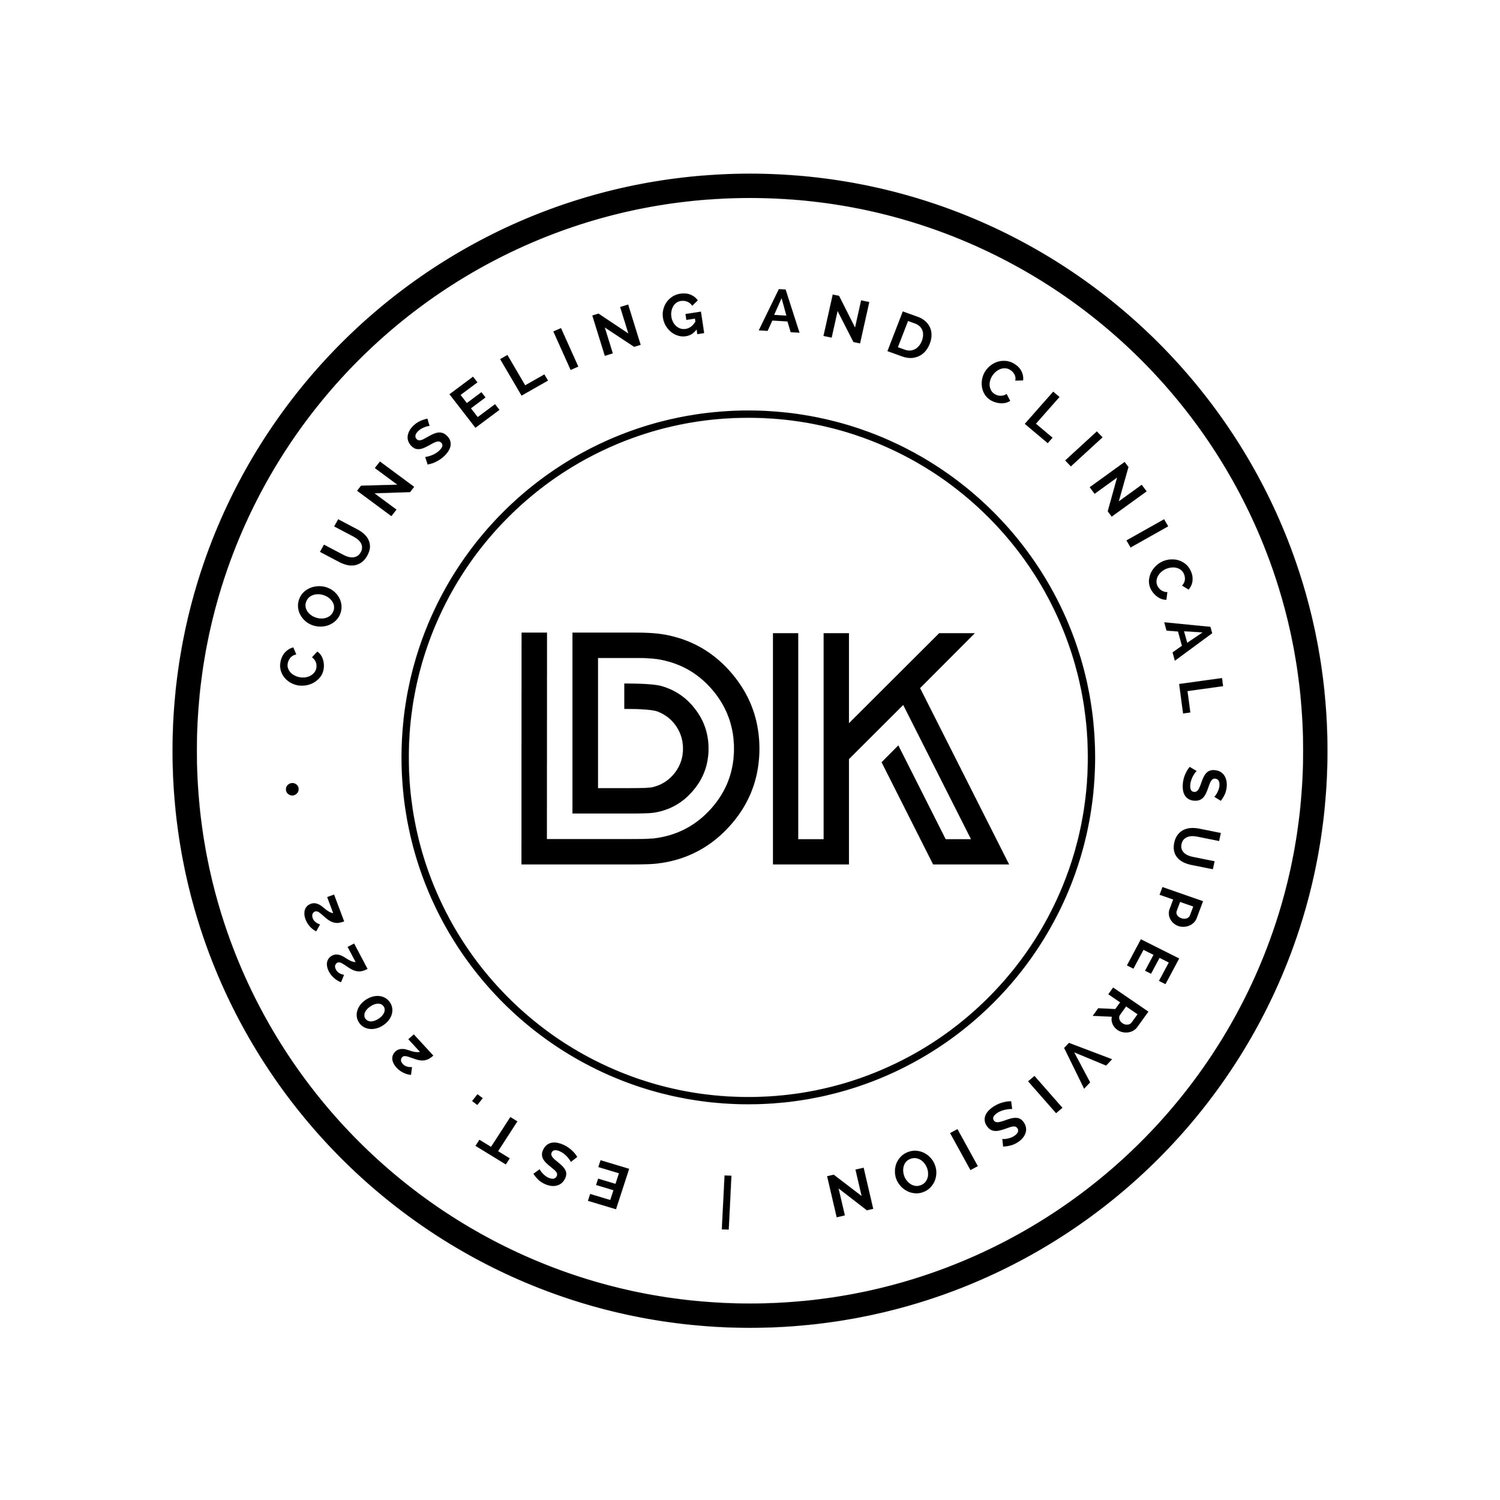 DK Counseling and Clinical Supervision